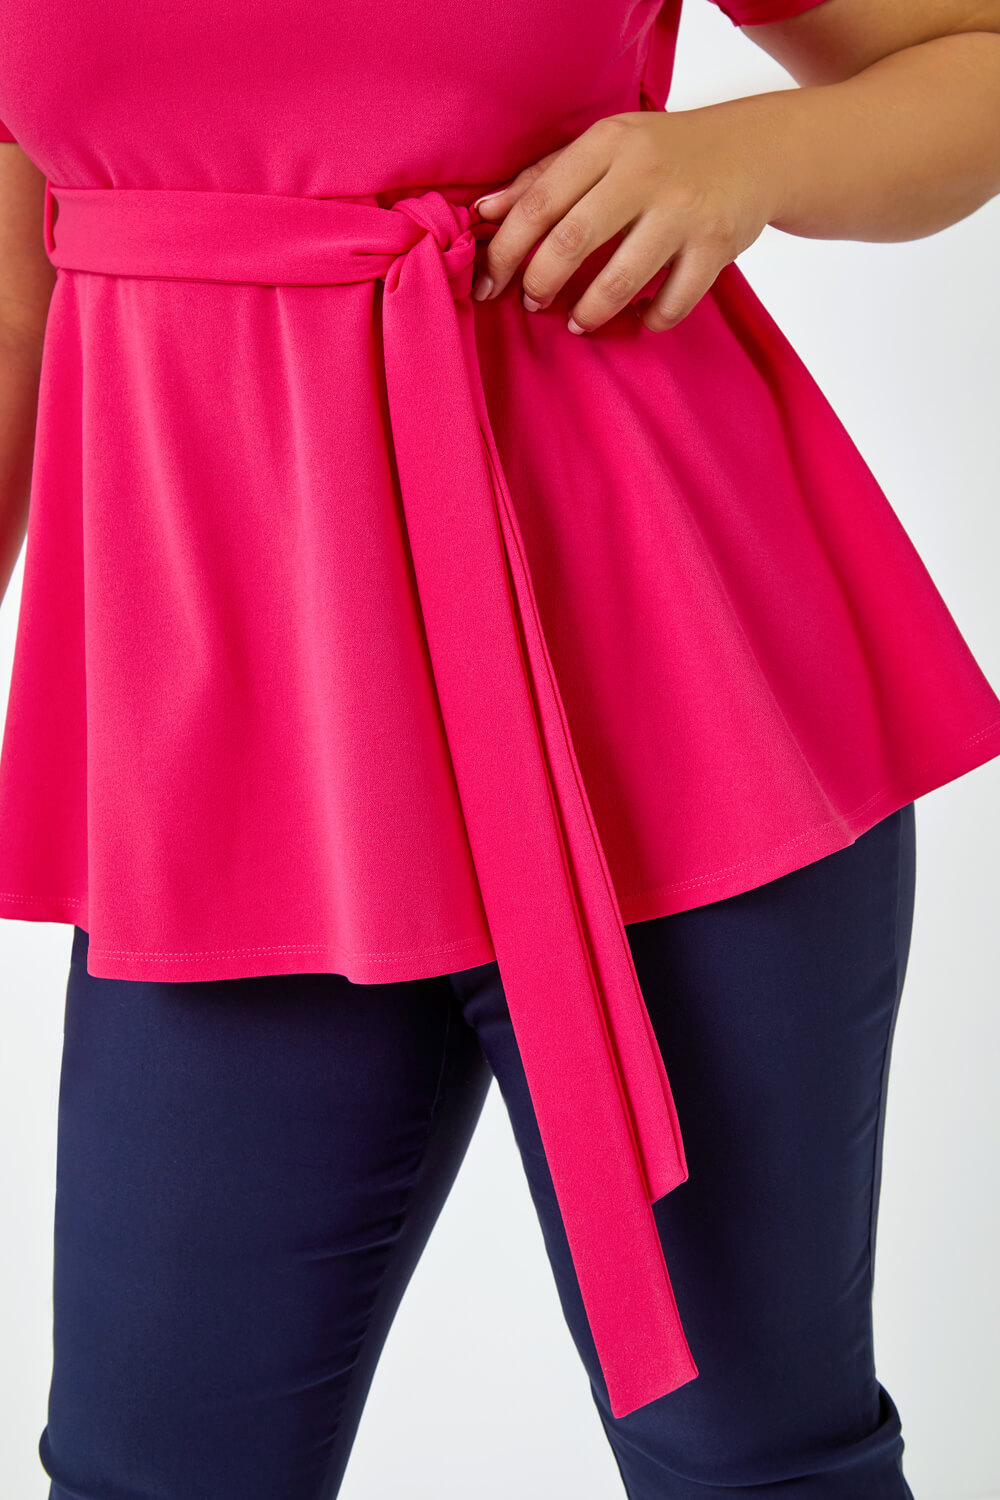 PINK Curve Stretch Belted Peplum Top, Image 5 of 5